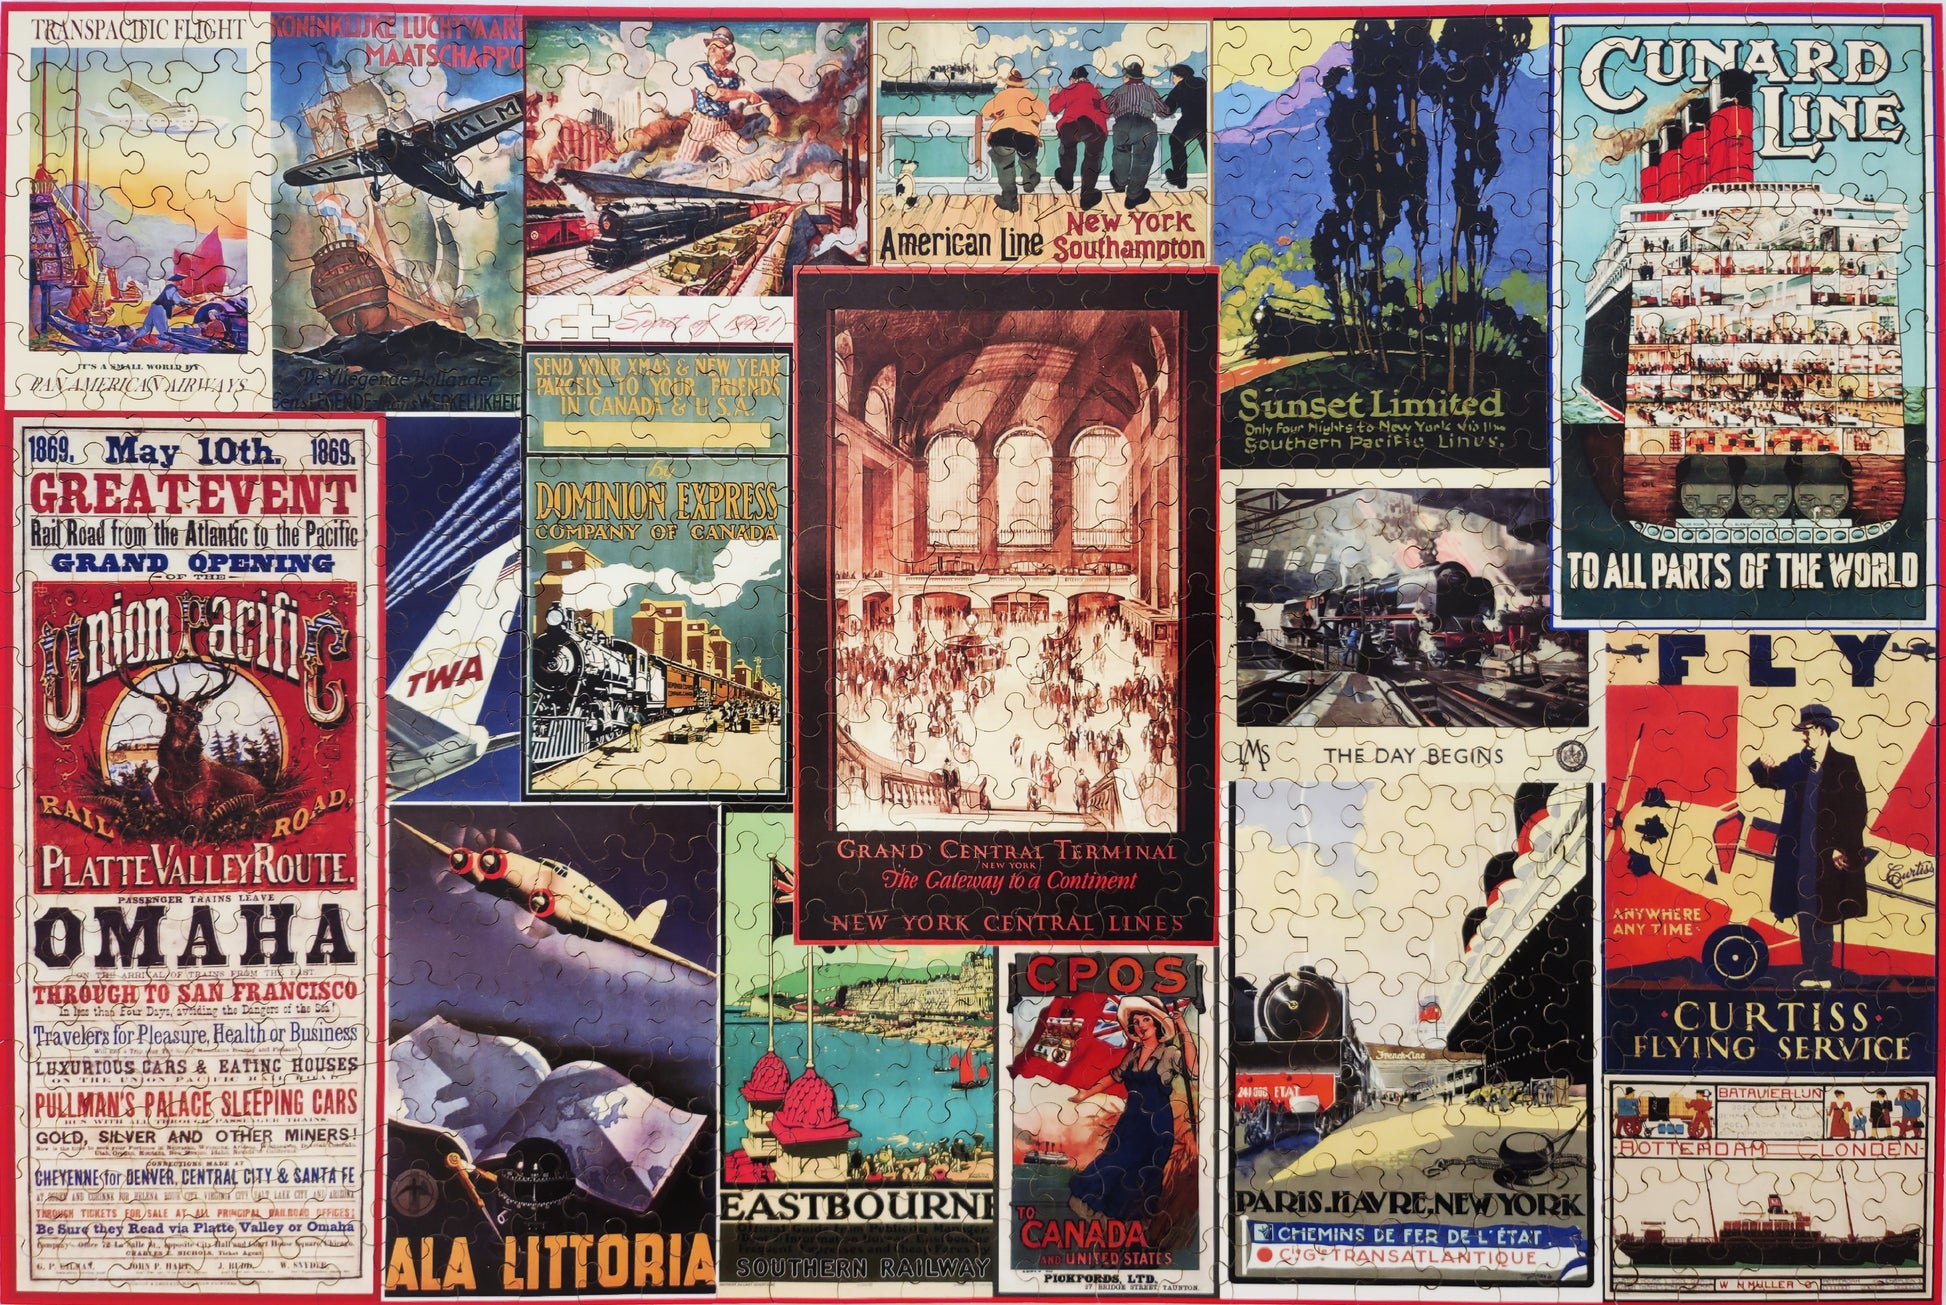 Vintage Travel Posters (502 Piece Wooden Jigsaw Puzzle)